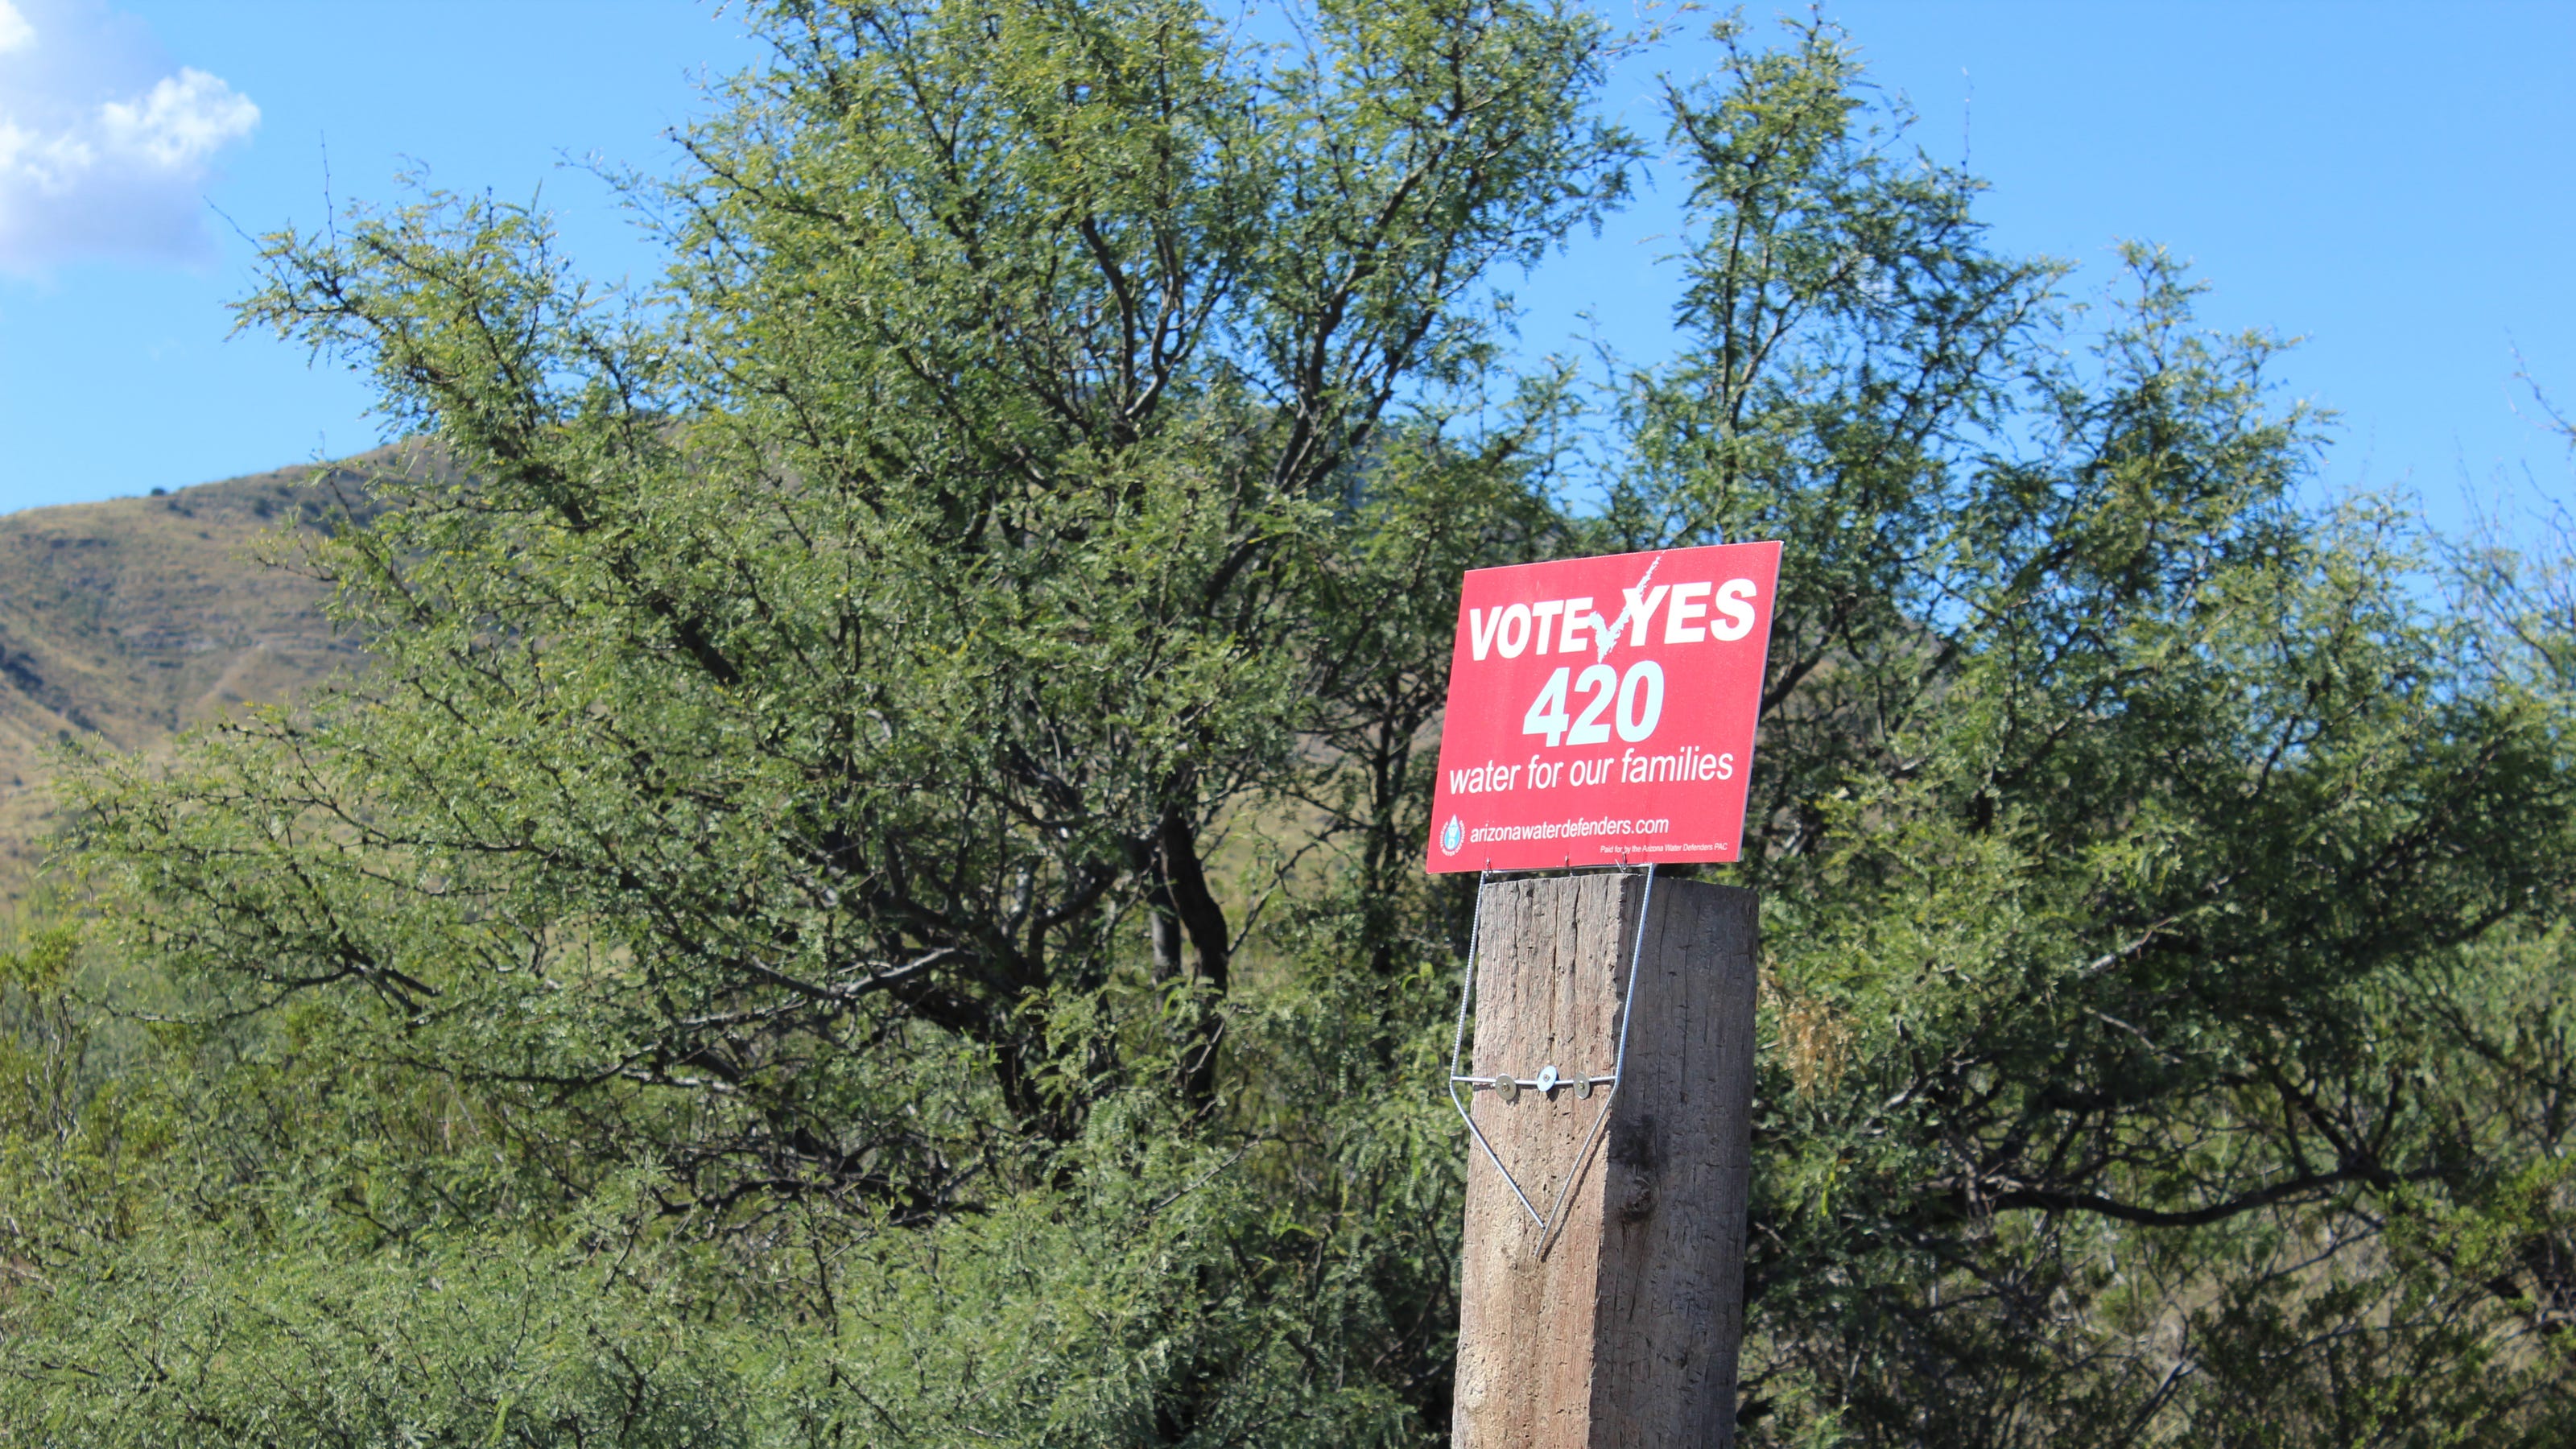 Cochise voters approve one groundwater plan, reject another - The Arizona Republic